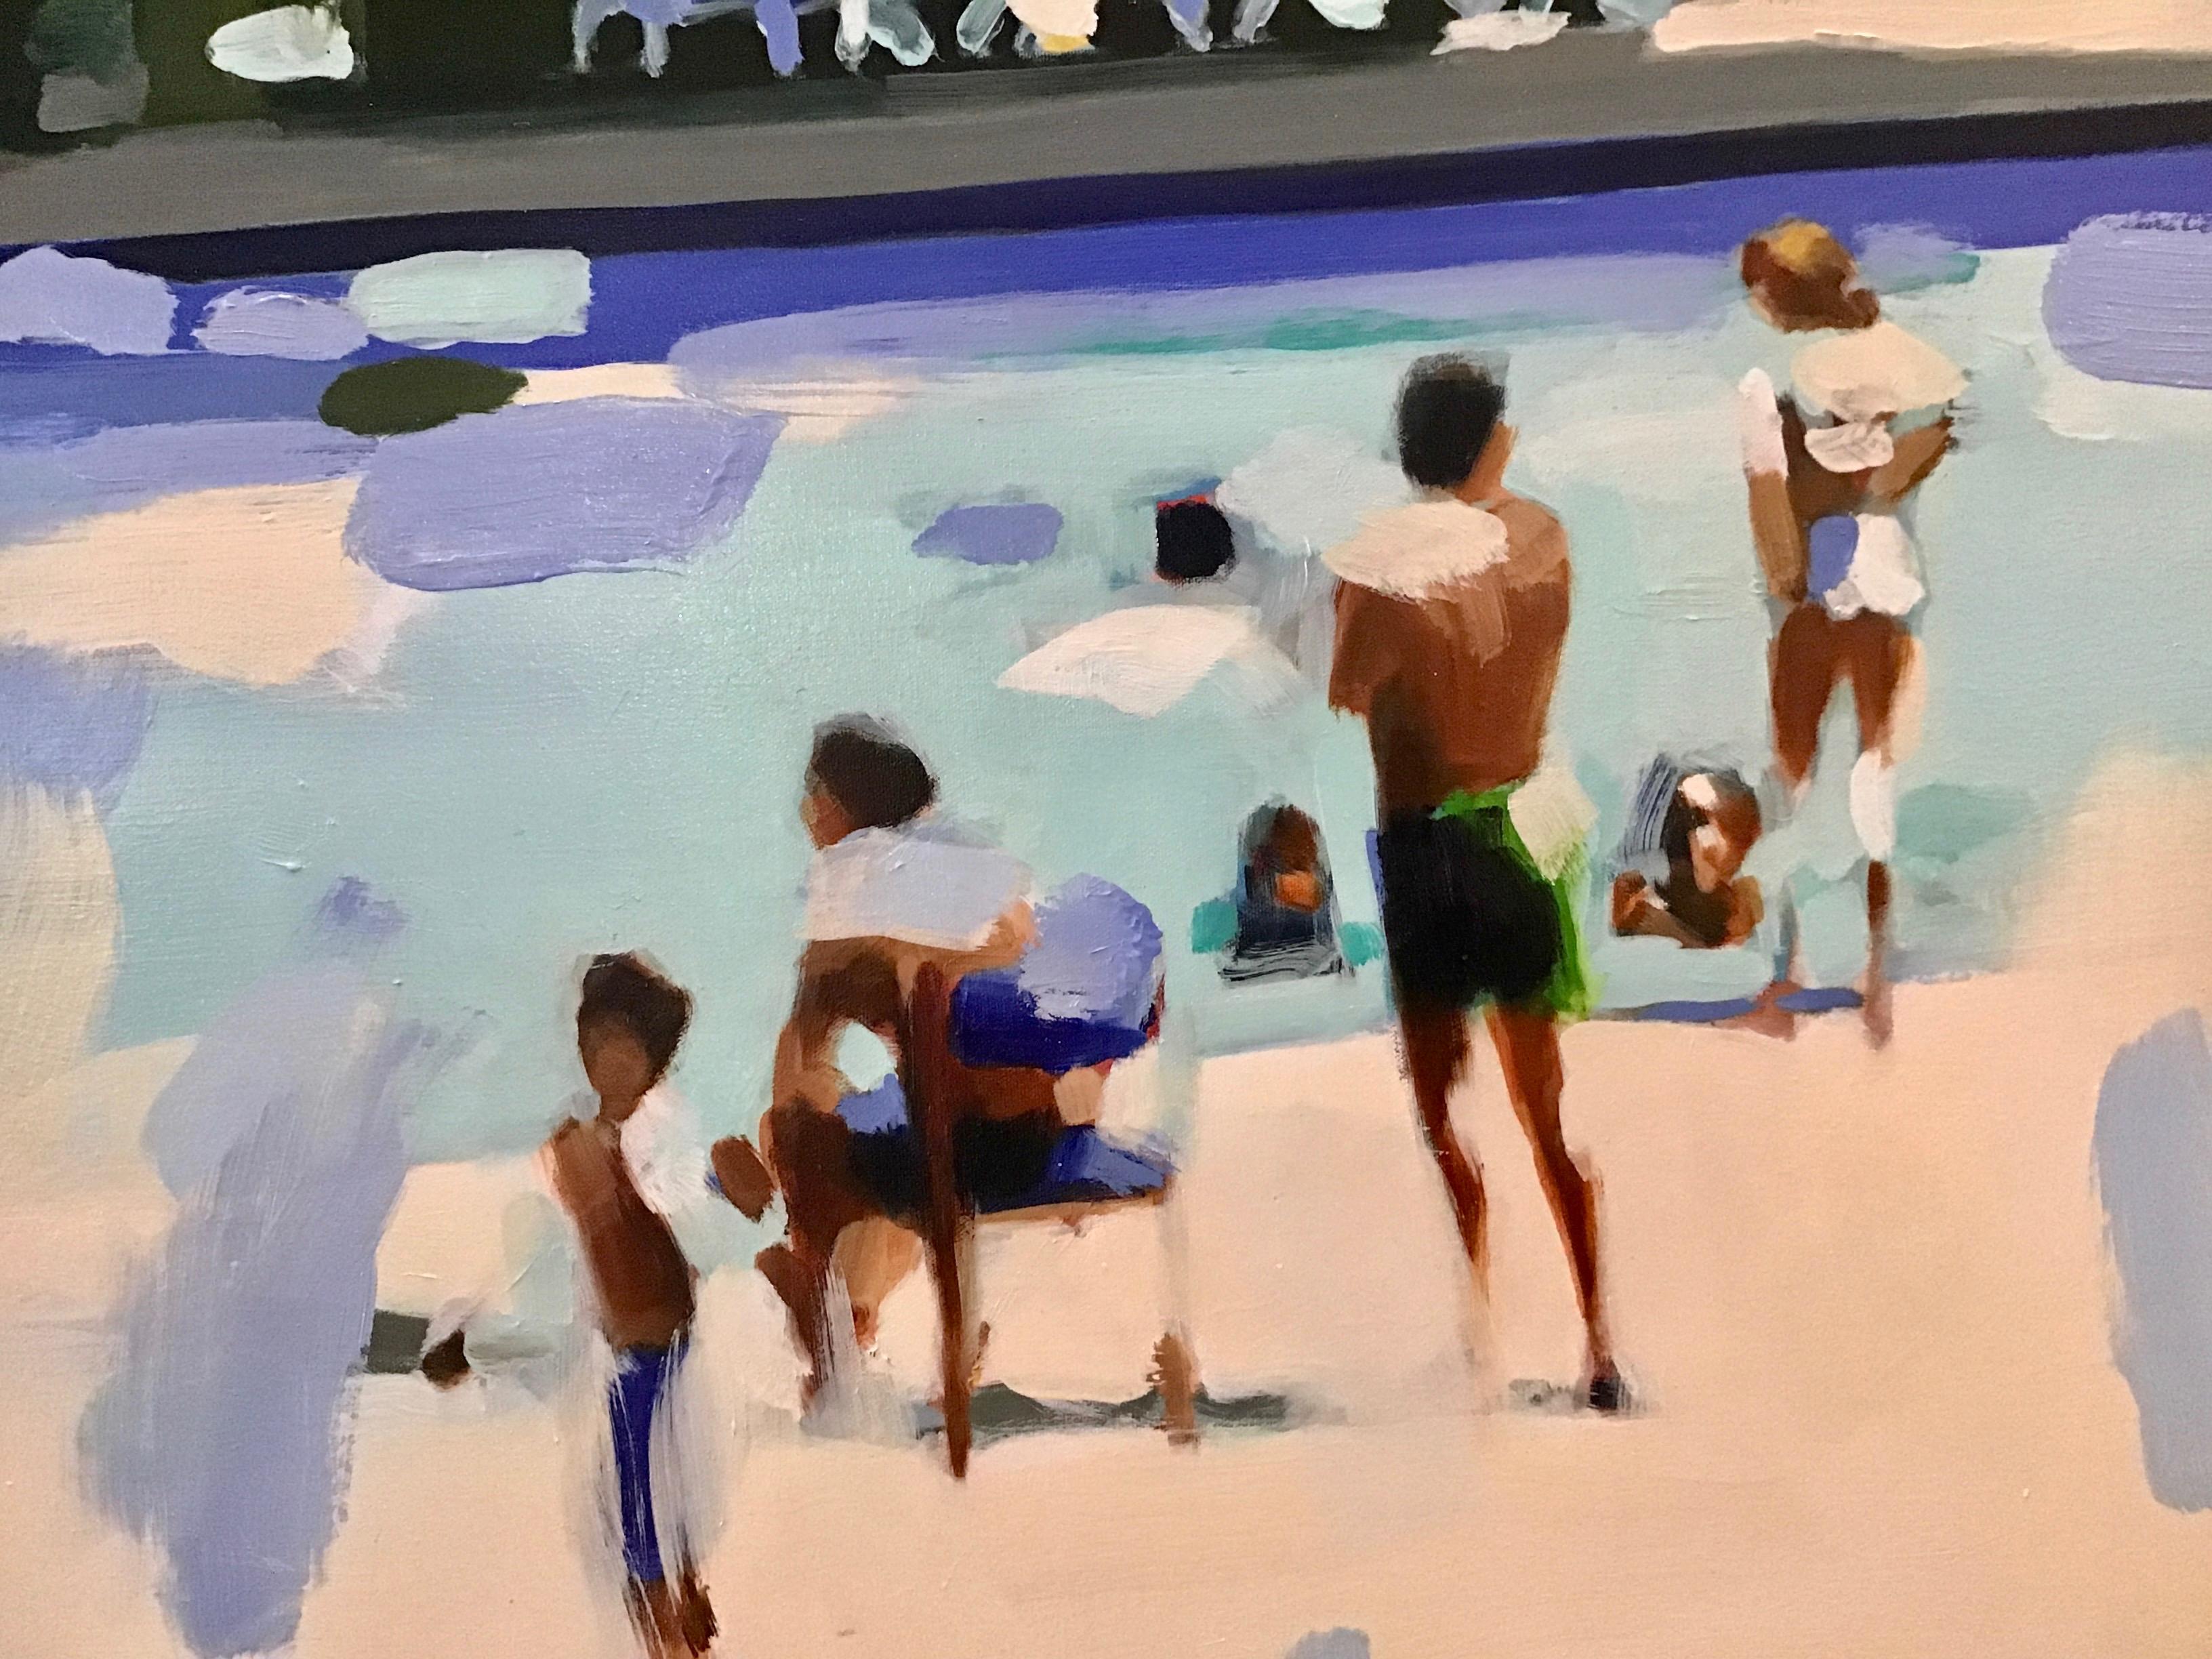 Abstract oil painting of people at a pool in neutrals and blues.

Water has been the backdrop to the significant events in my life. The reconstruction of radiant moments that exist in memory define the images I choose to paint, of swimming in the